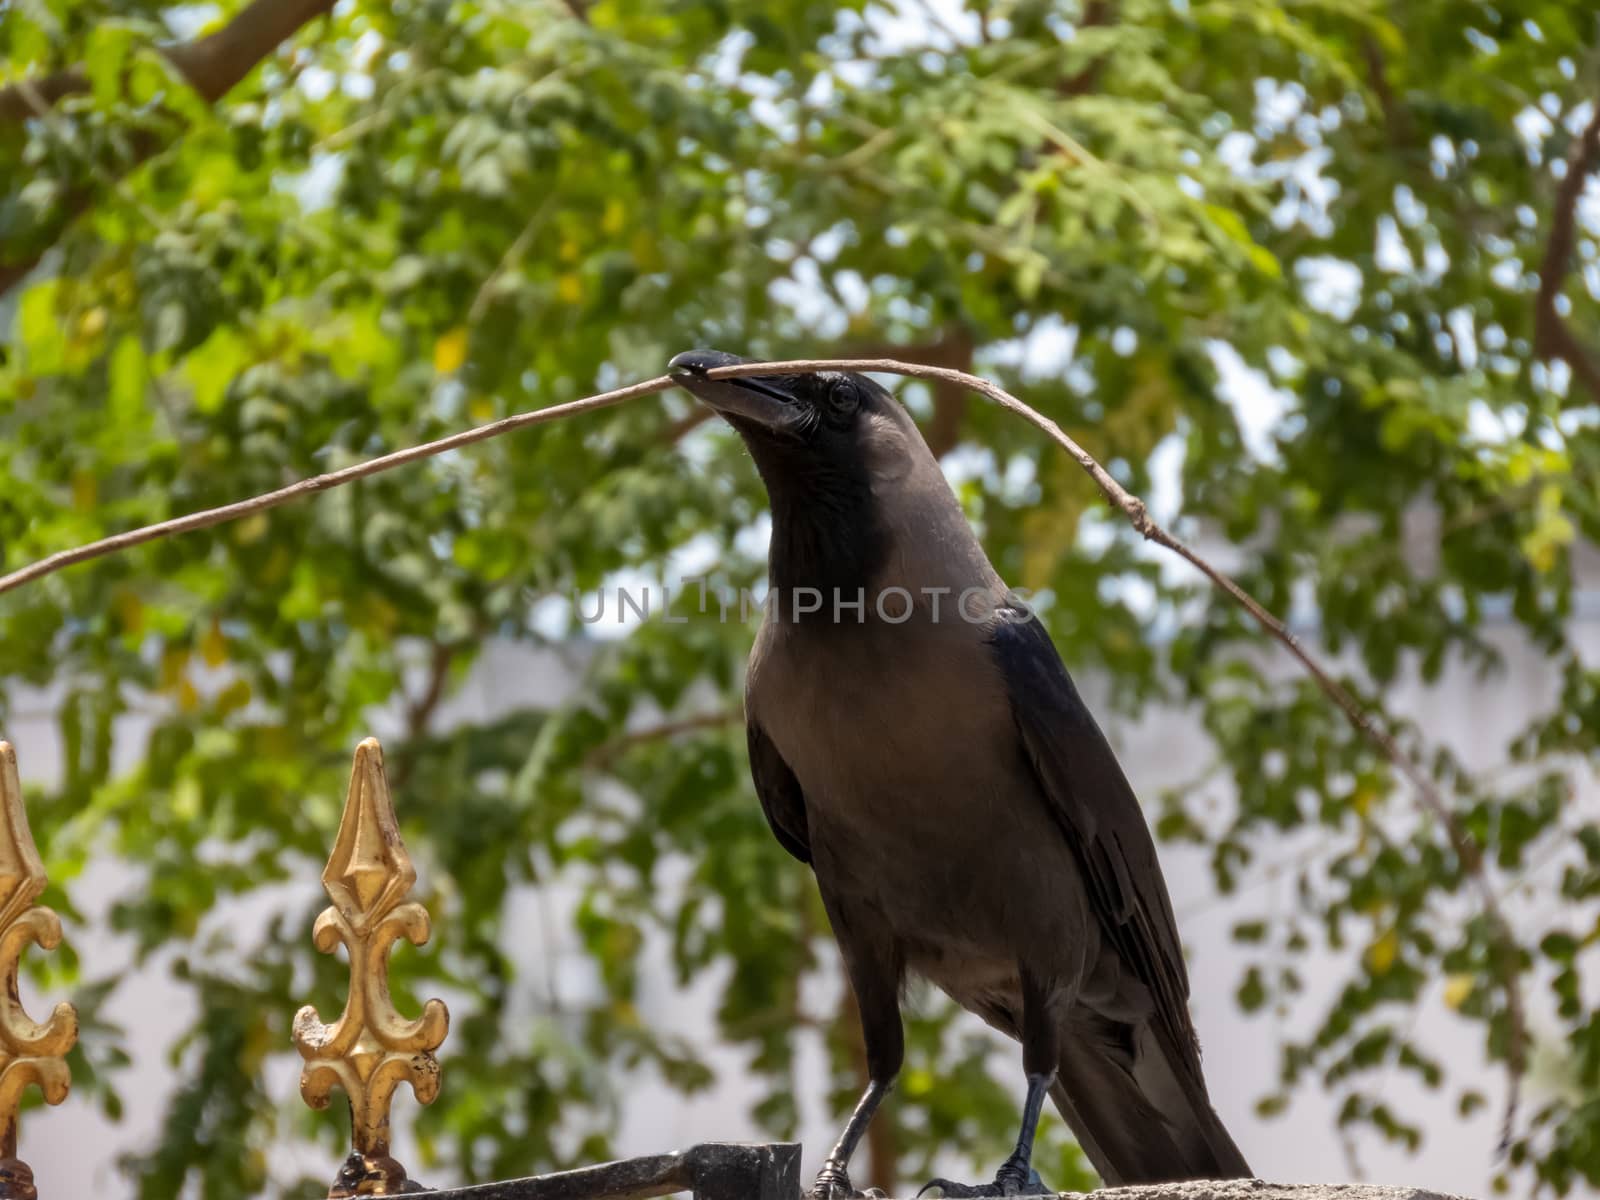 A crow is sitting with a straw to build its nest